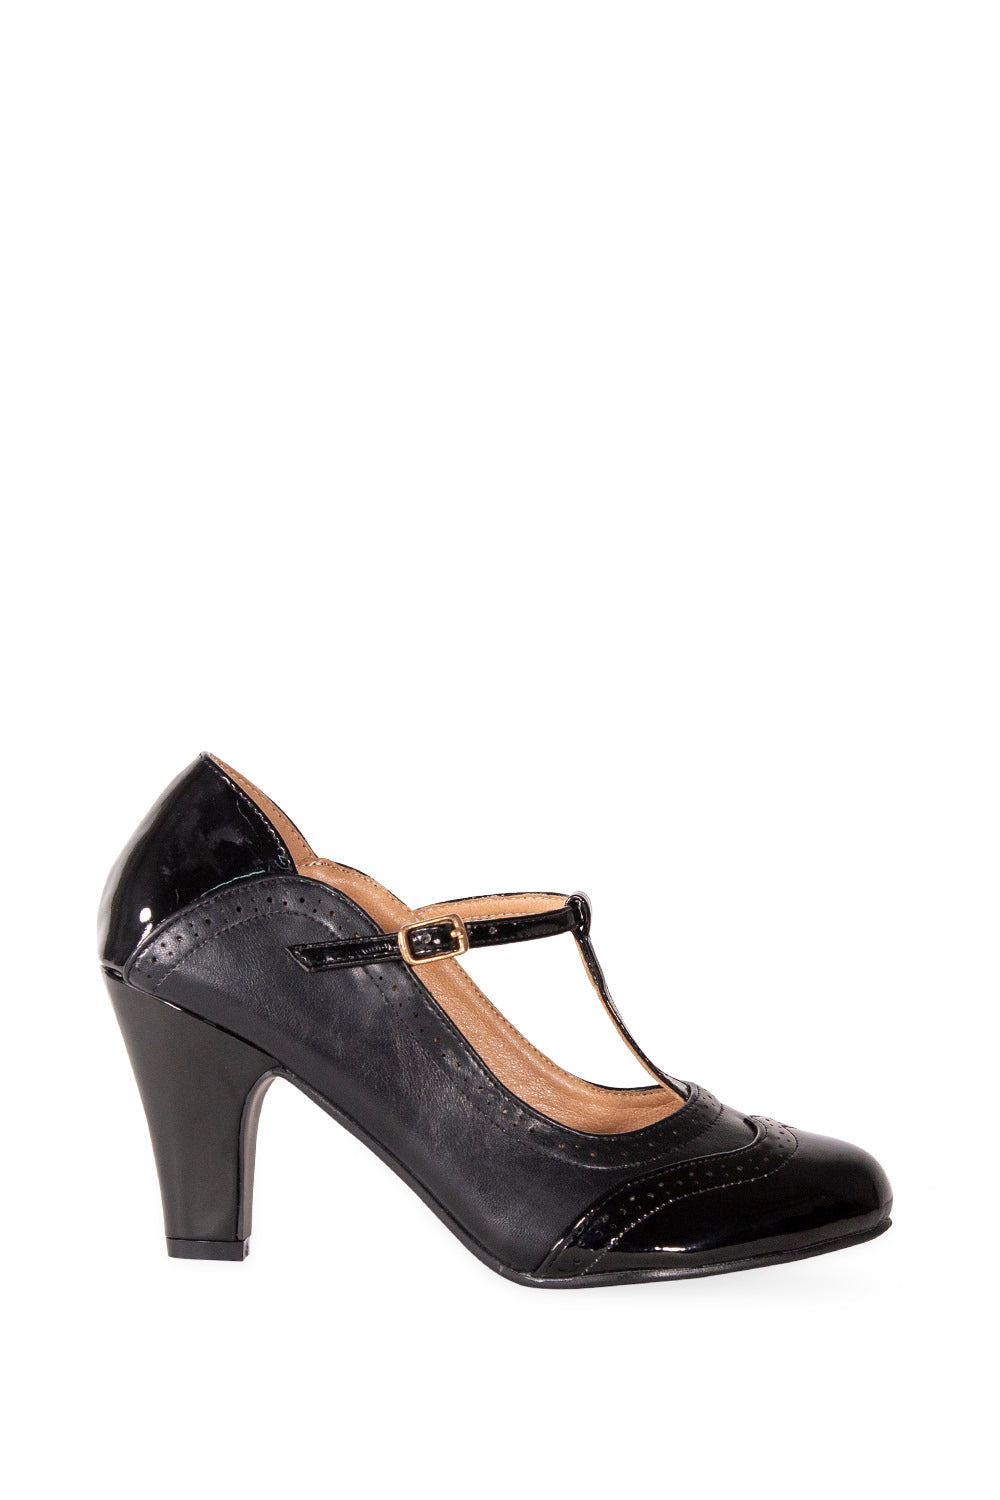 Side View of the Diva Blues 50s style patent black leather  T Bar Heels